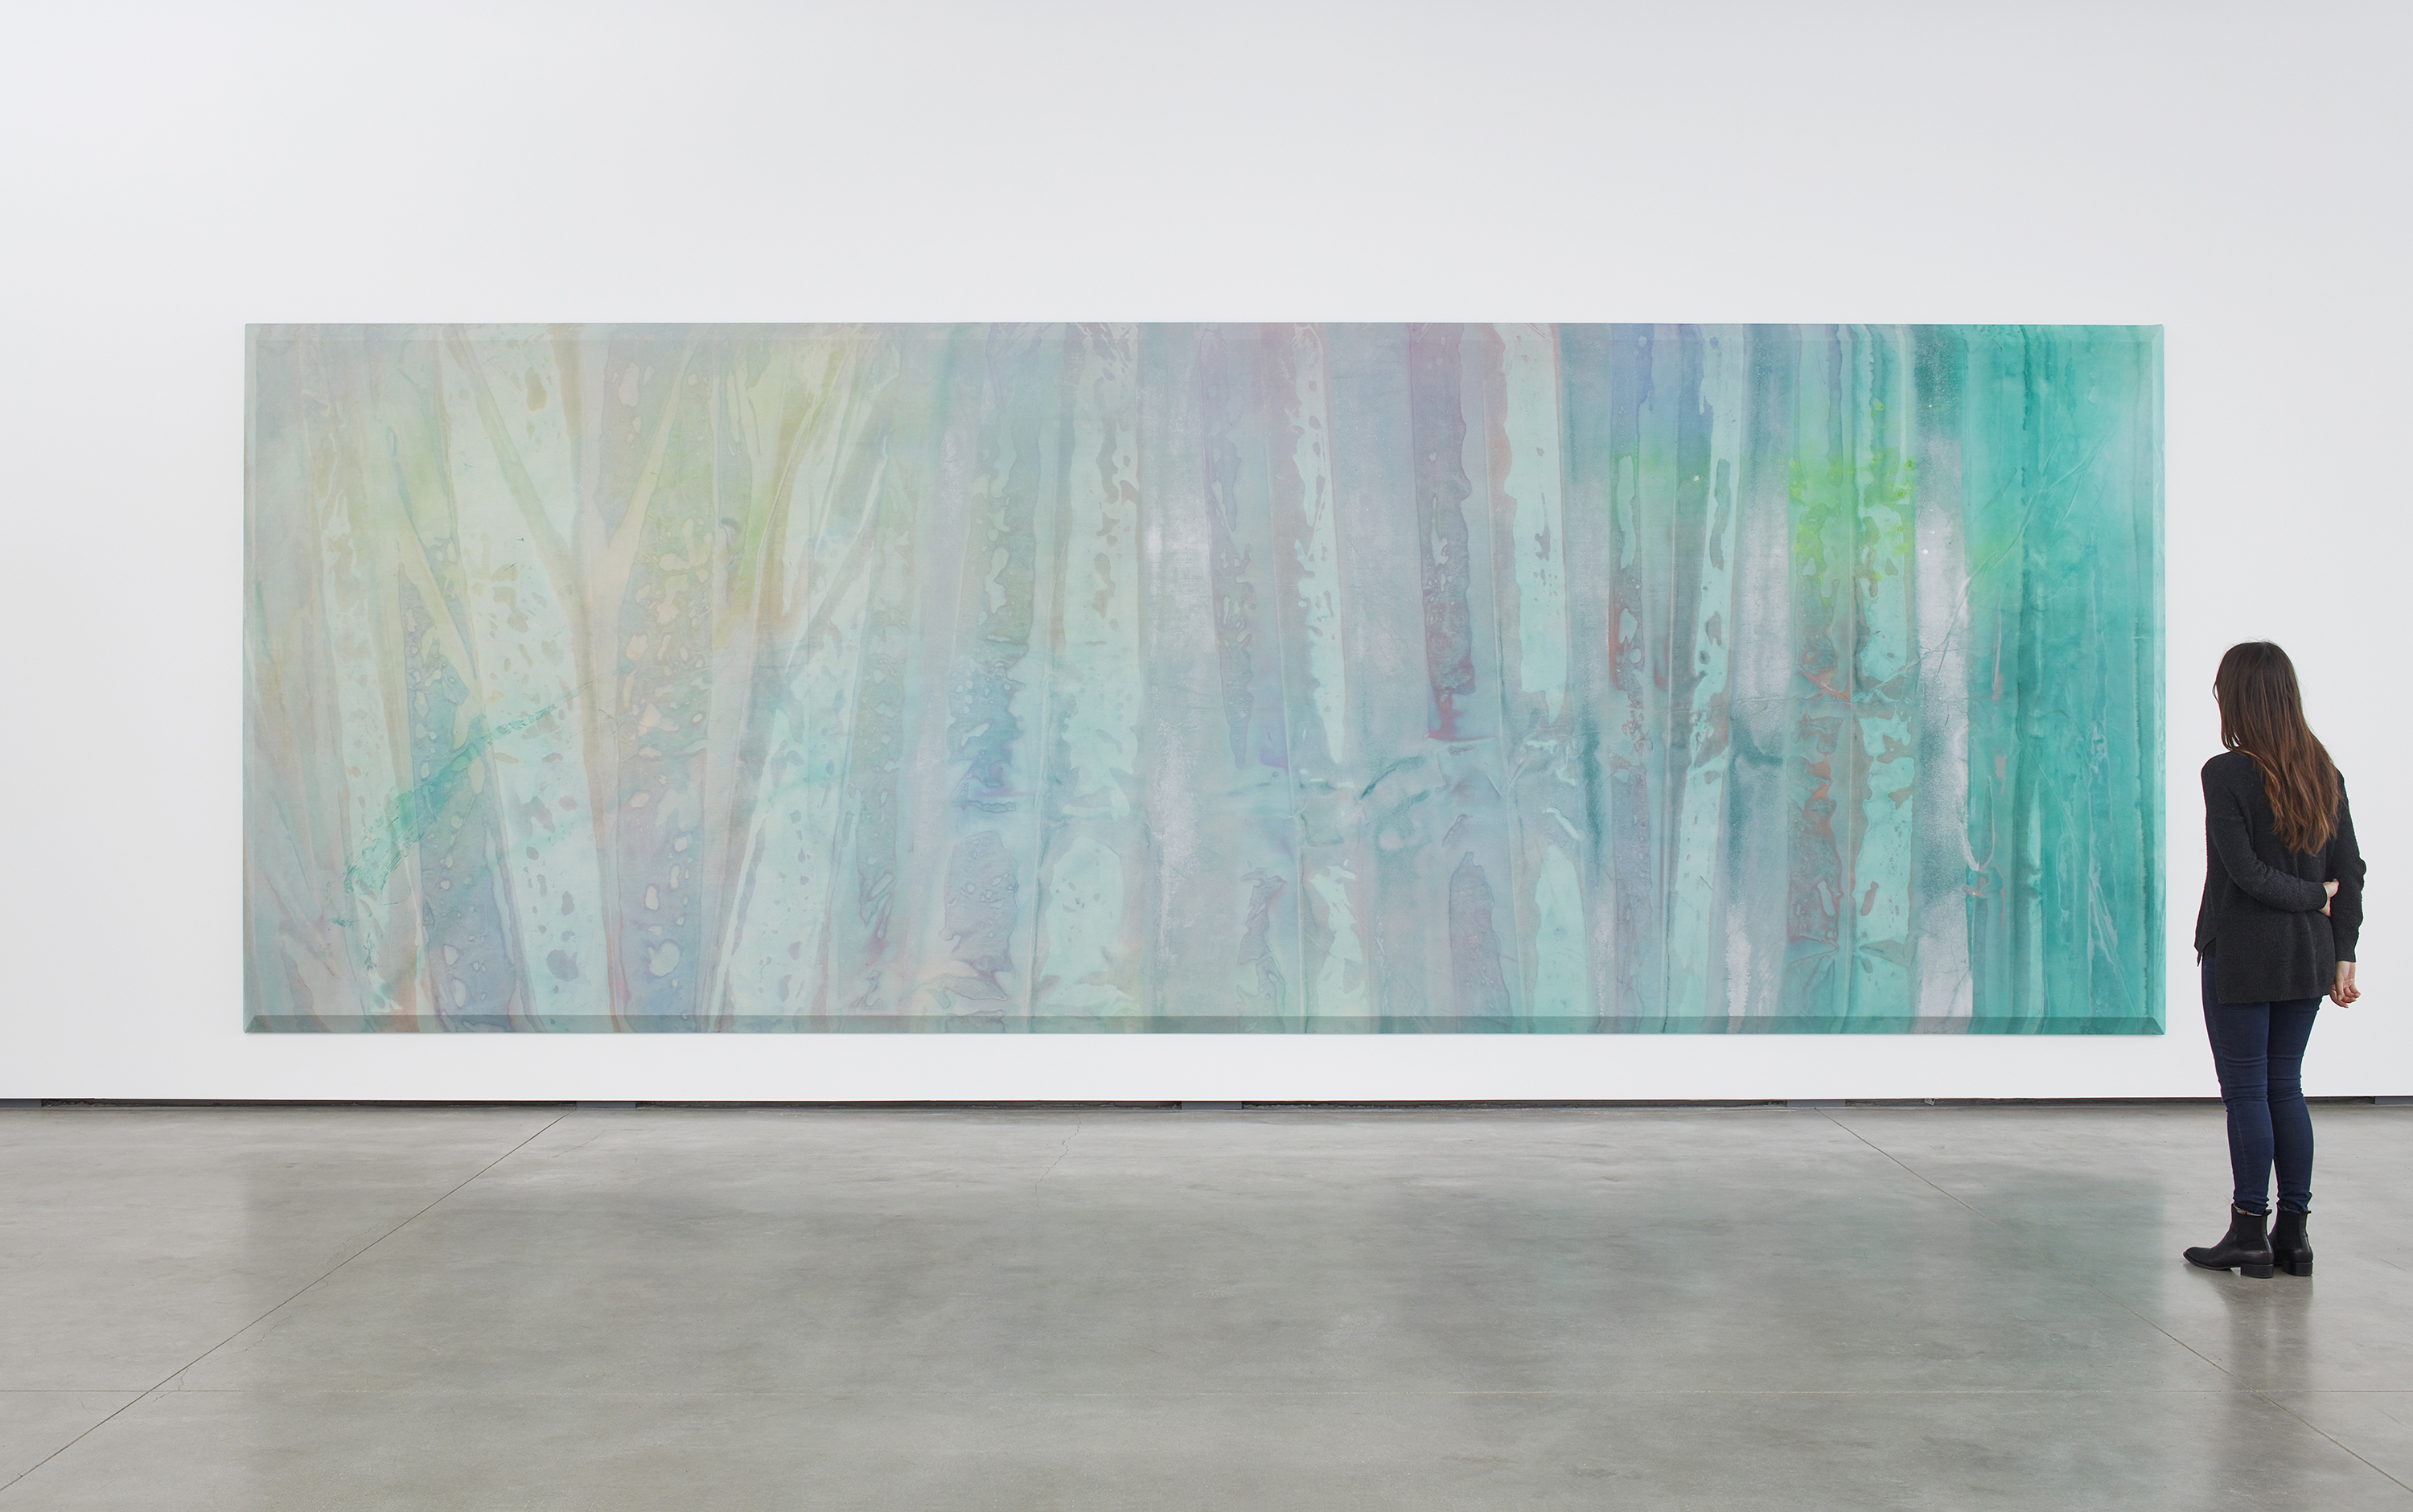 Sam Gilliam, ‘Green April,’ 1969. Acrylic on canvas, 98 by 271 by 3 7/8in (248.9 by 688.3 by 9.8cm). Collection of Kunstmuseum Basel, Basel, Switzerland. Courtesy of David Kordansky Gallery and Pace Gallery. Photography by Lee Thompson.